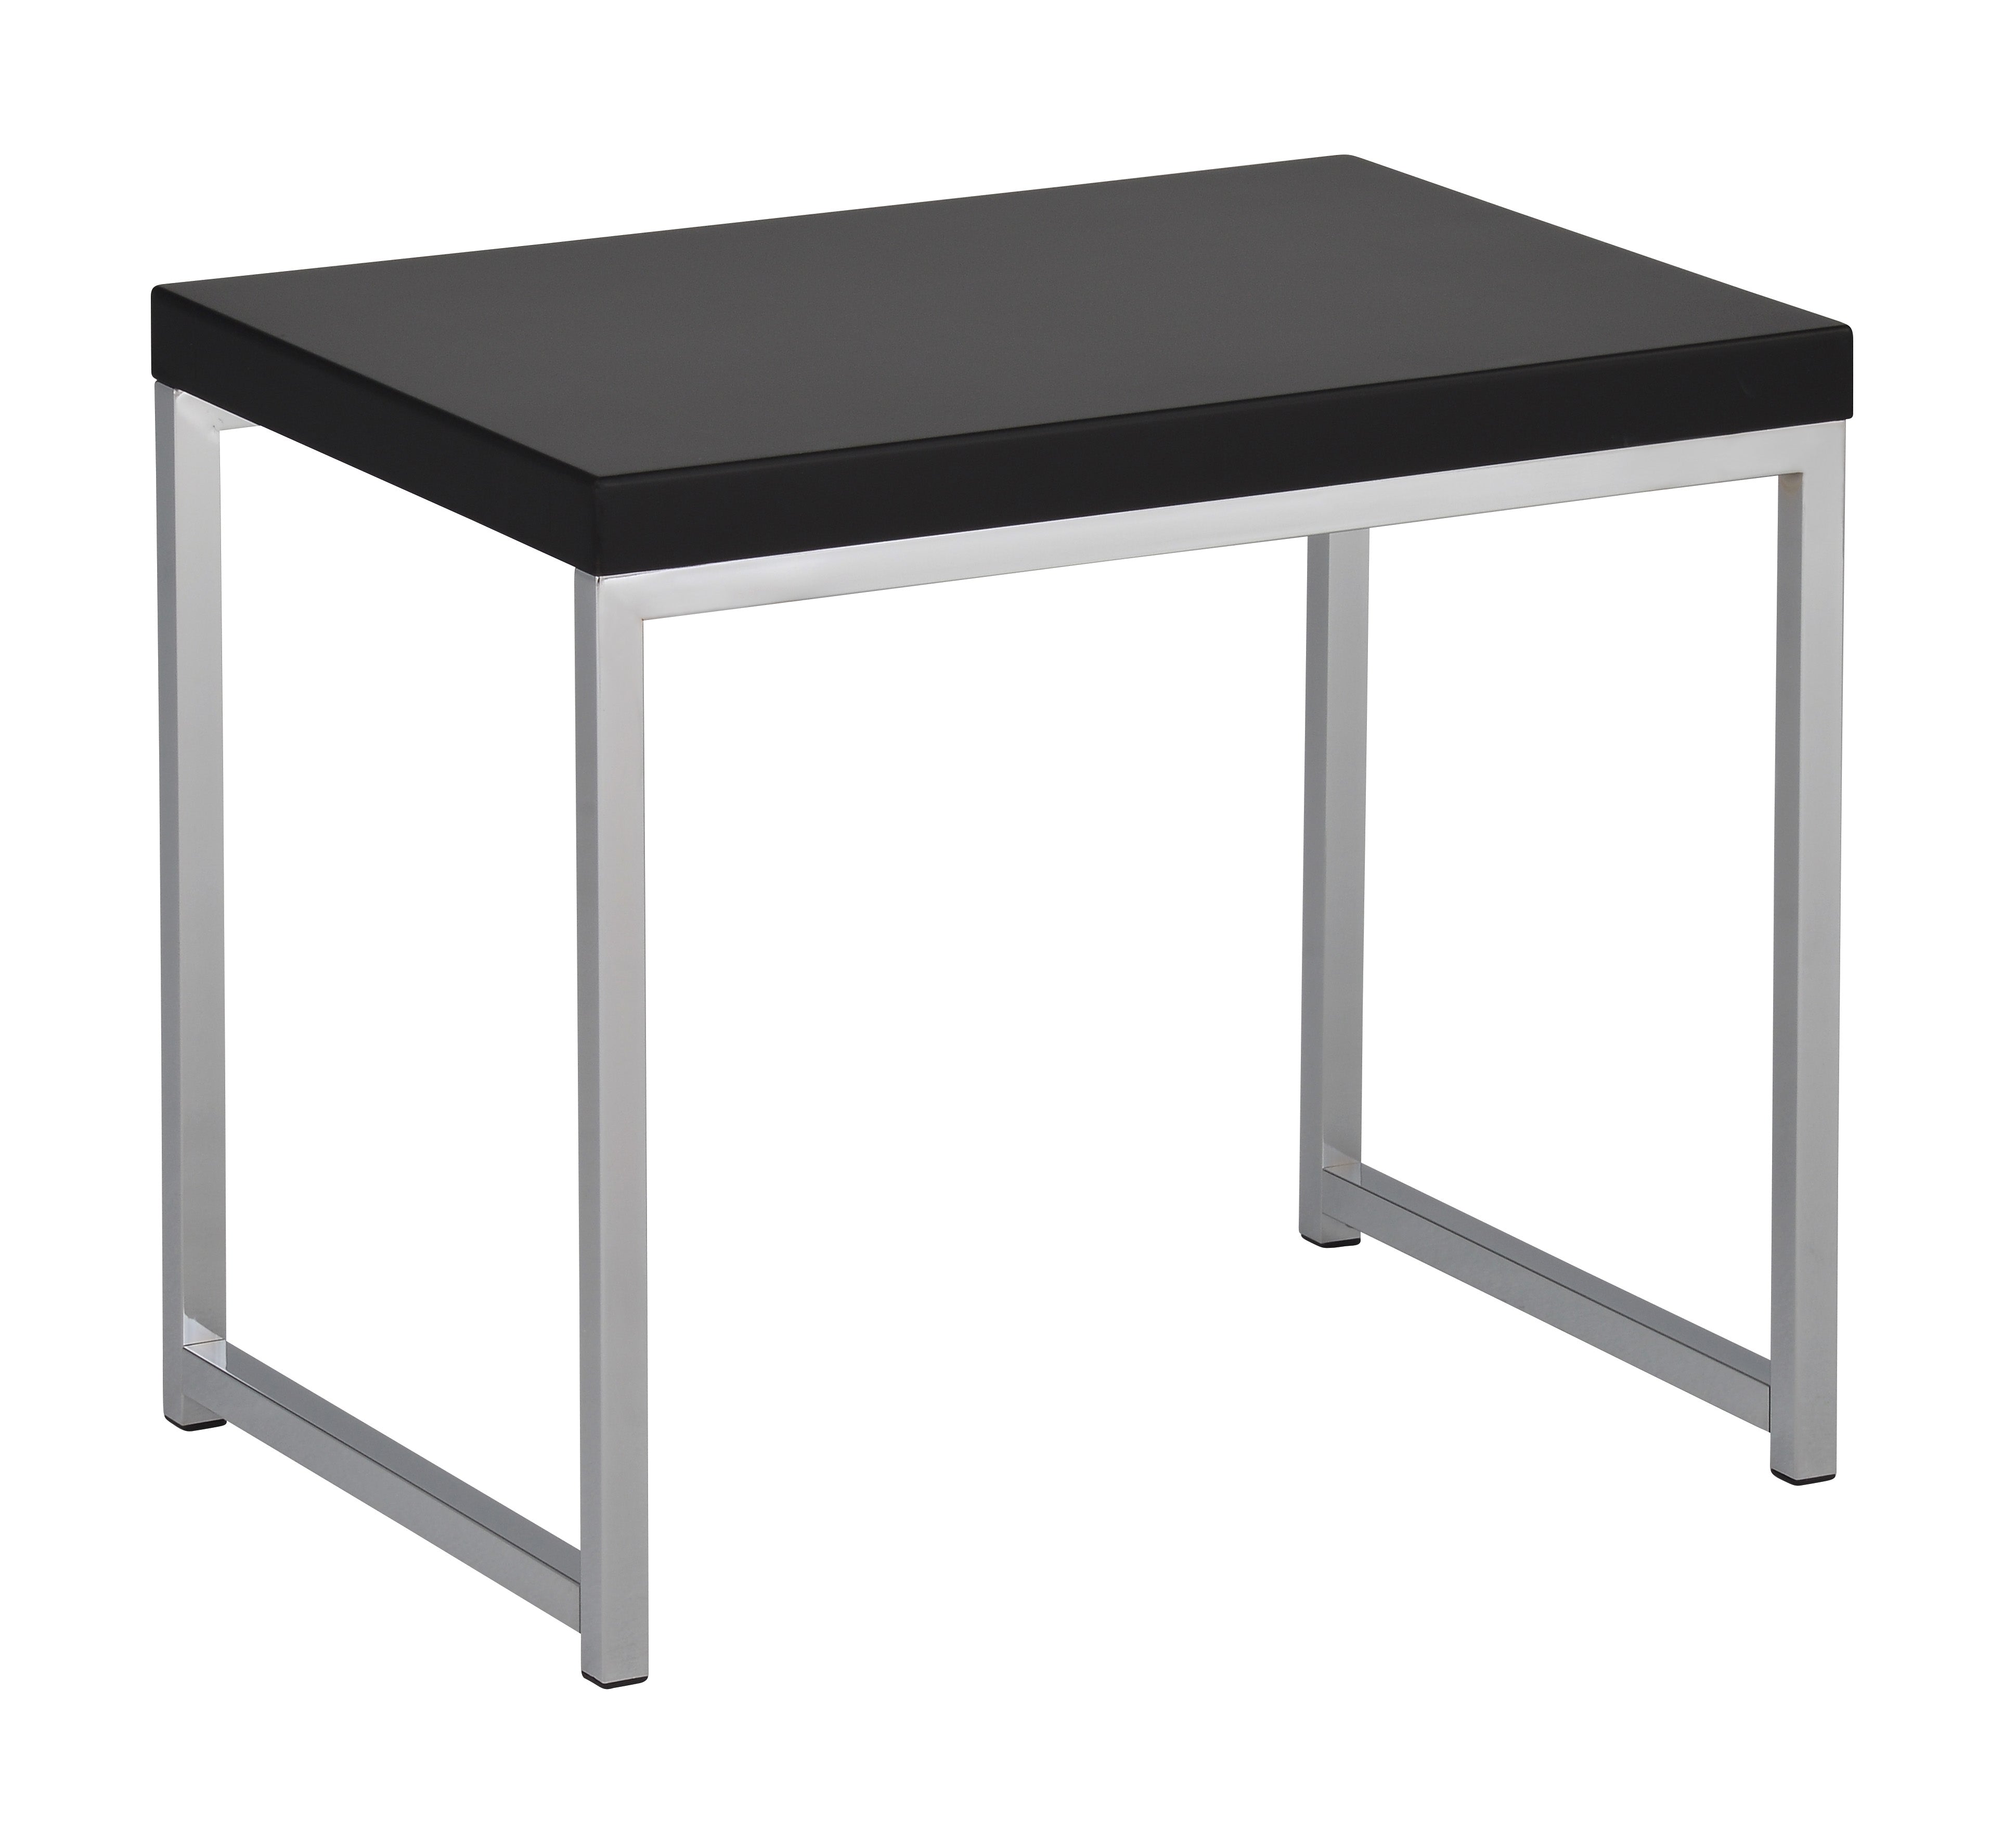 WST09 - Wall Street End Table by Office Star